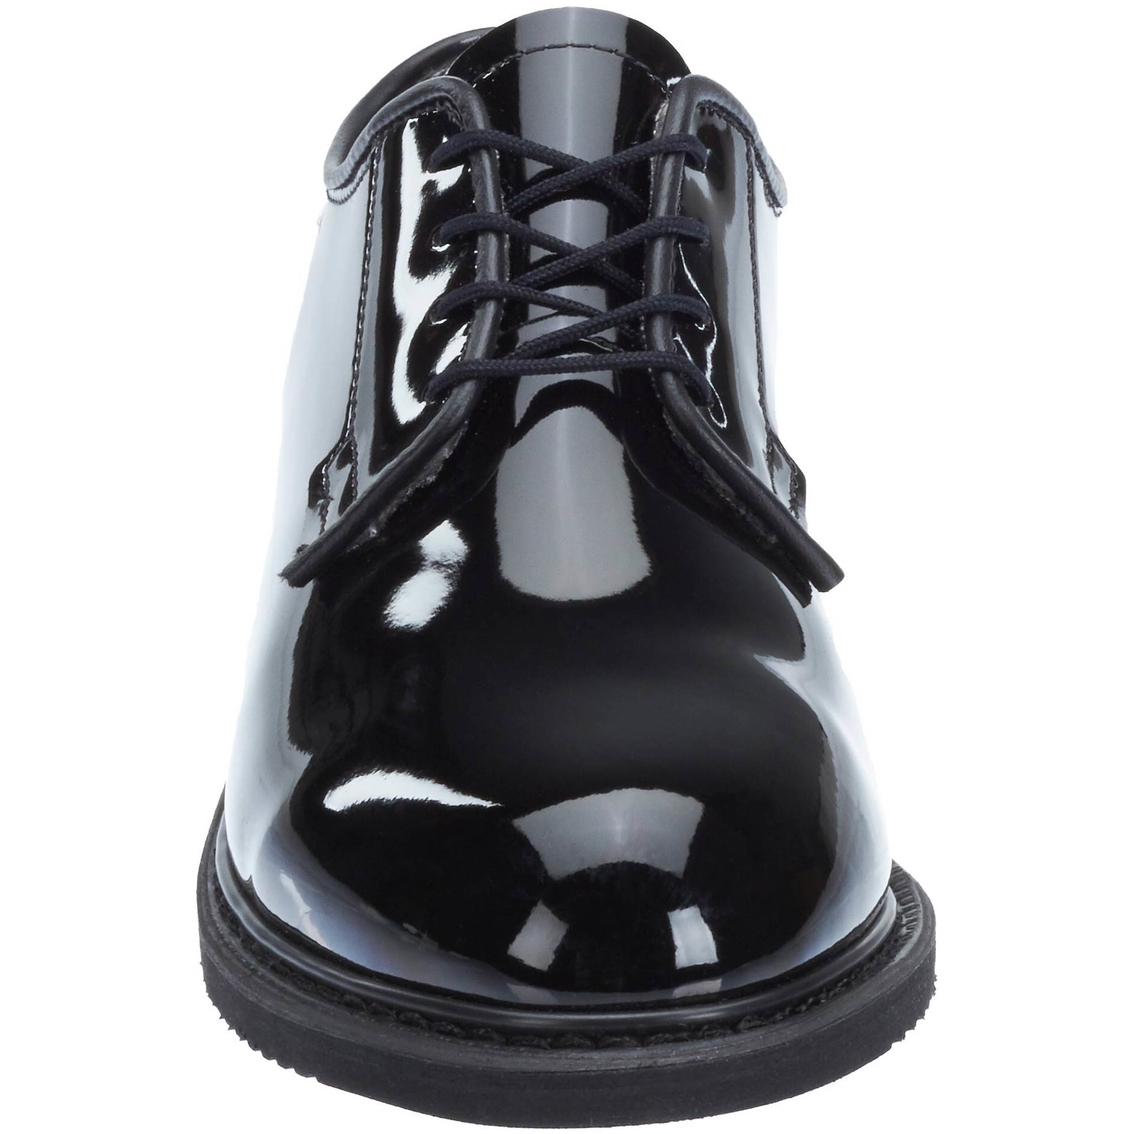 Bate Women's Black Oxford Shoes 731 - Image 6 of 8